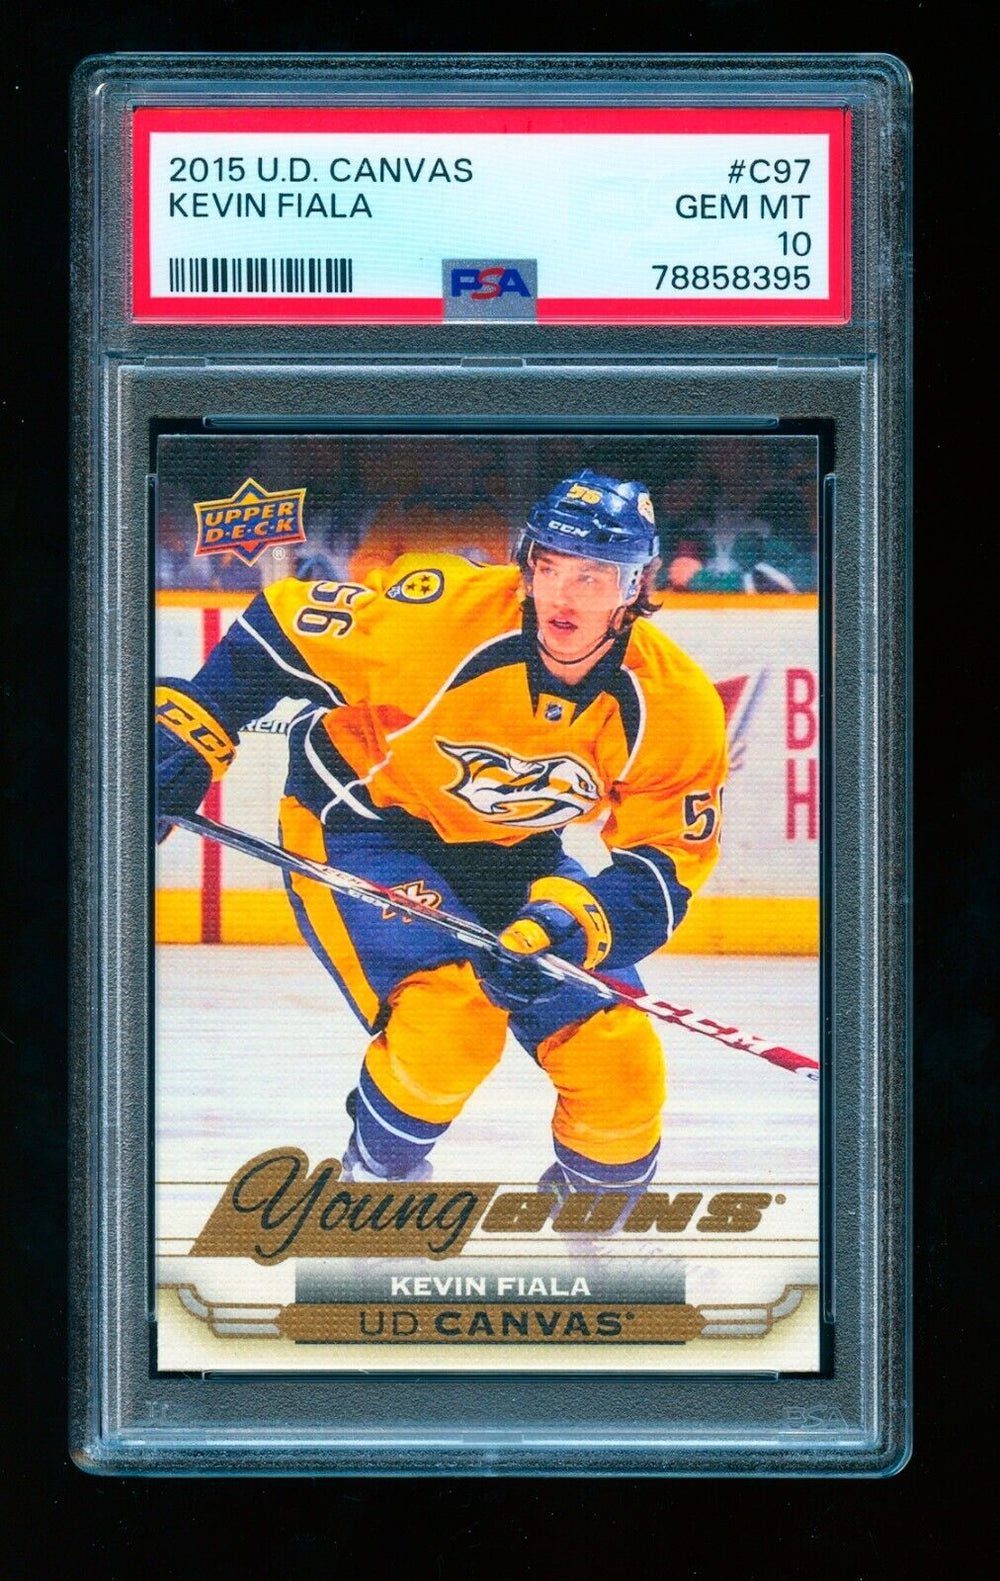 2015-16 Upper Deck Series 1 C97 Kevin Fiala Young Guns Canvas Rookie PSA 10